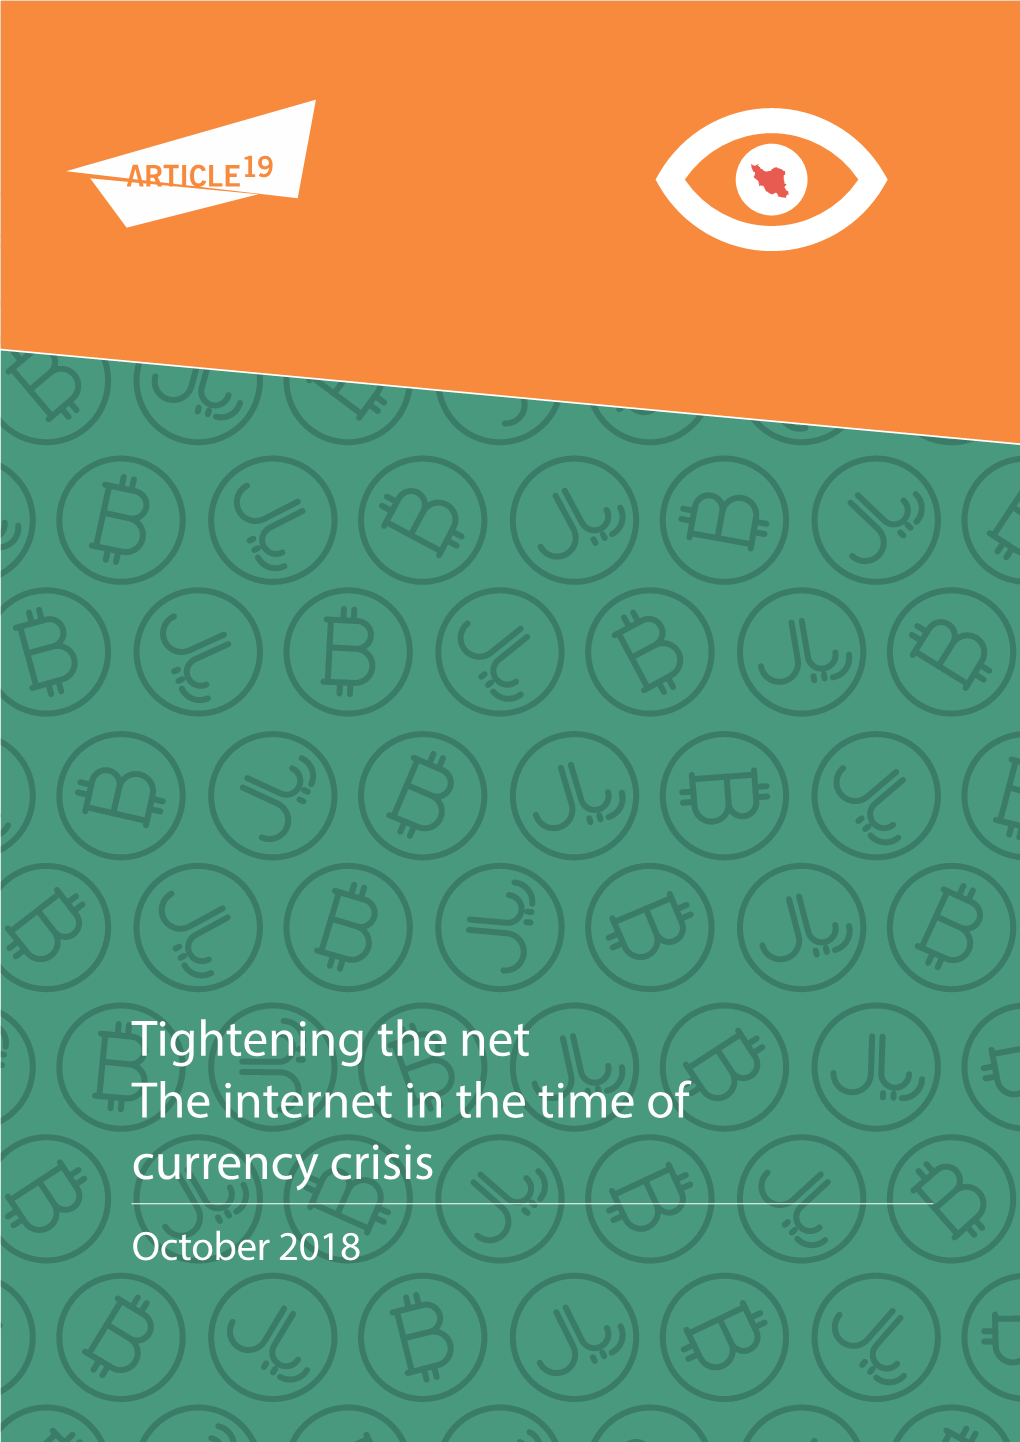 Internet in the Time of Currency Crisis October 2018